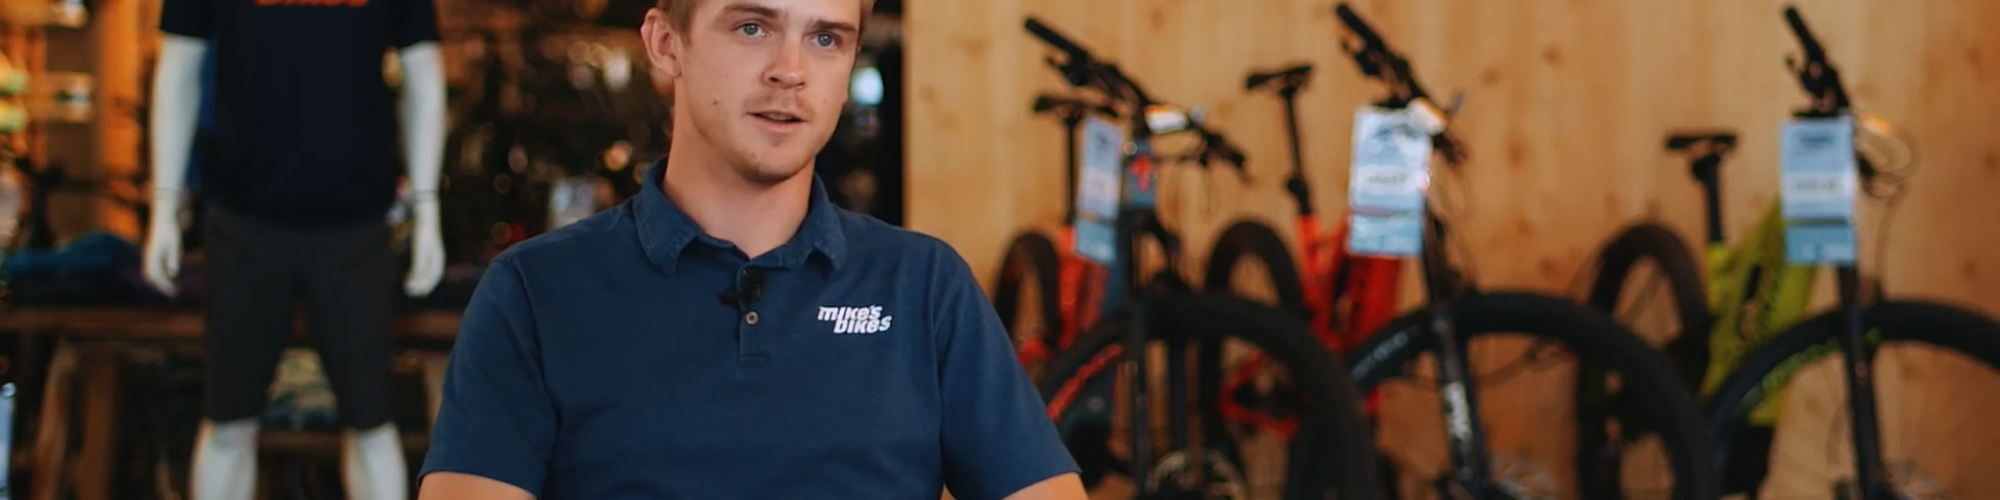 How Mike’s Bikes uses Jotform and Trello to drive sales